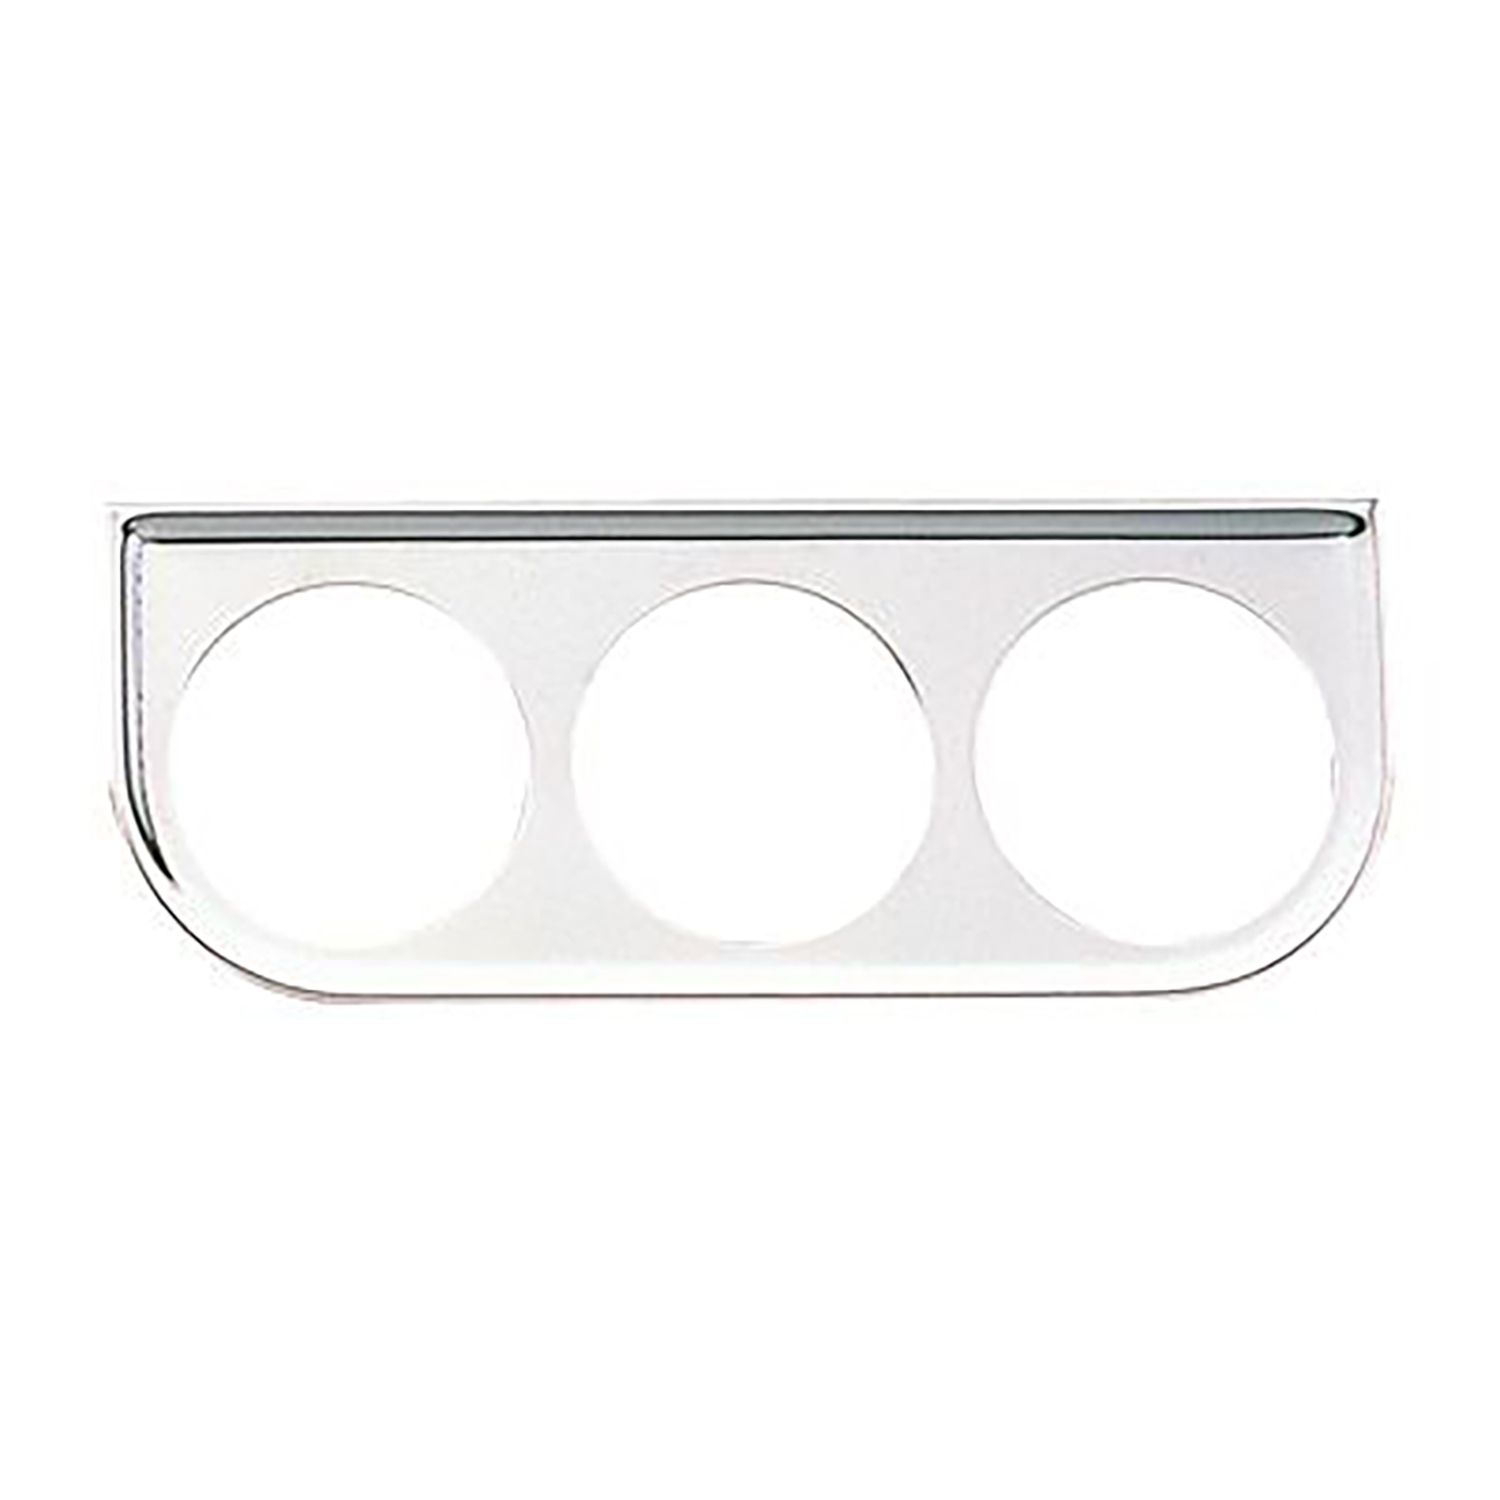 2 in. Chrome Triple Mounting Panel